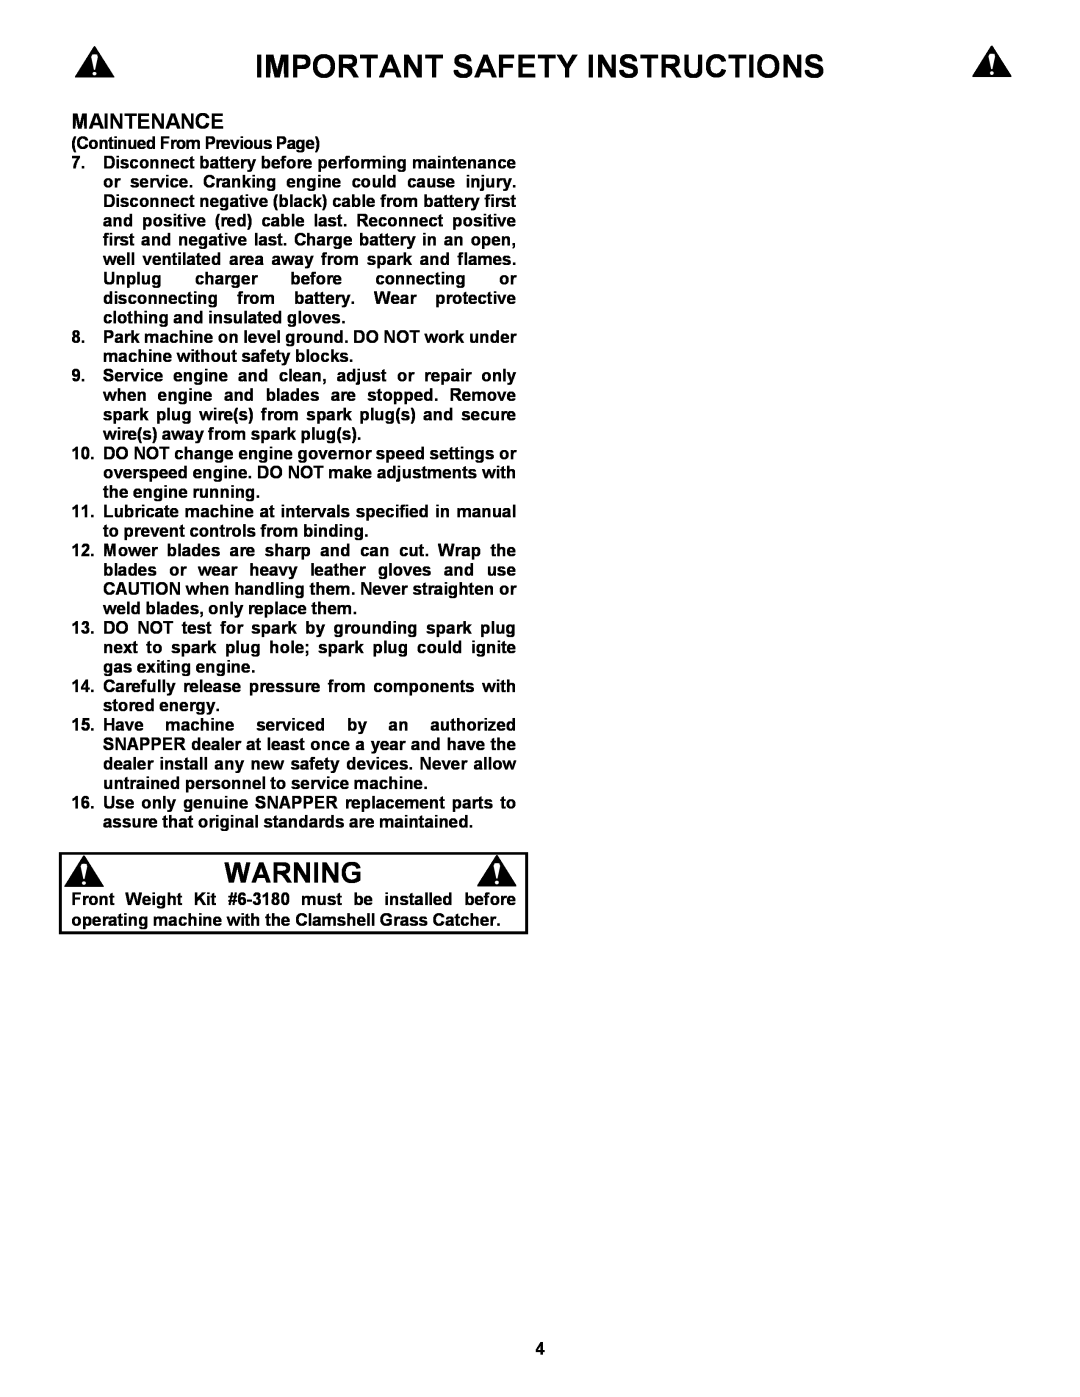 Snapper 6-3162, 7-3571 manual Important Safety Instructions, Maintenance, Continued From Previous Page 